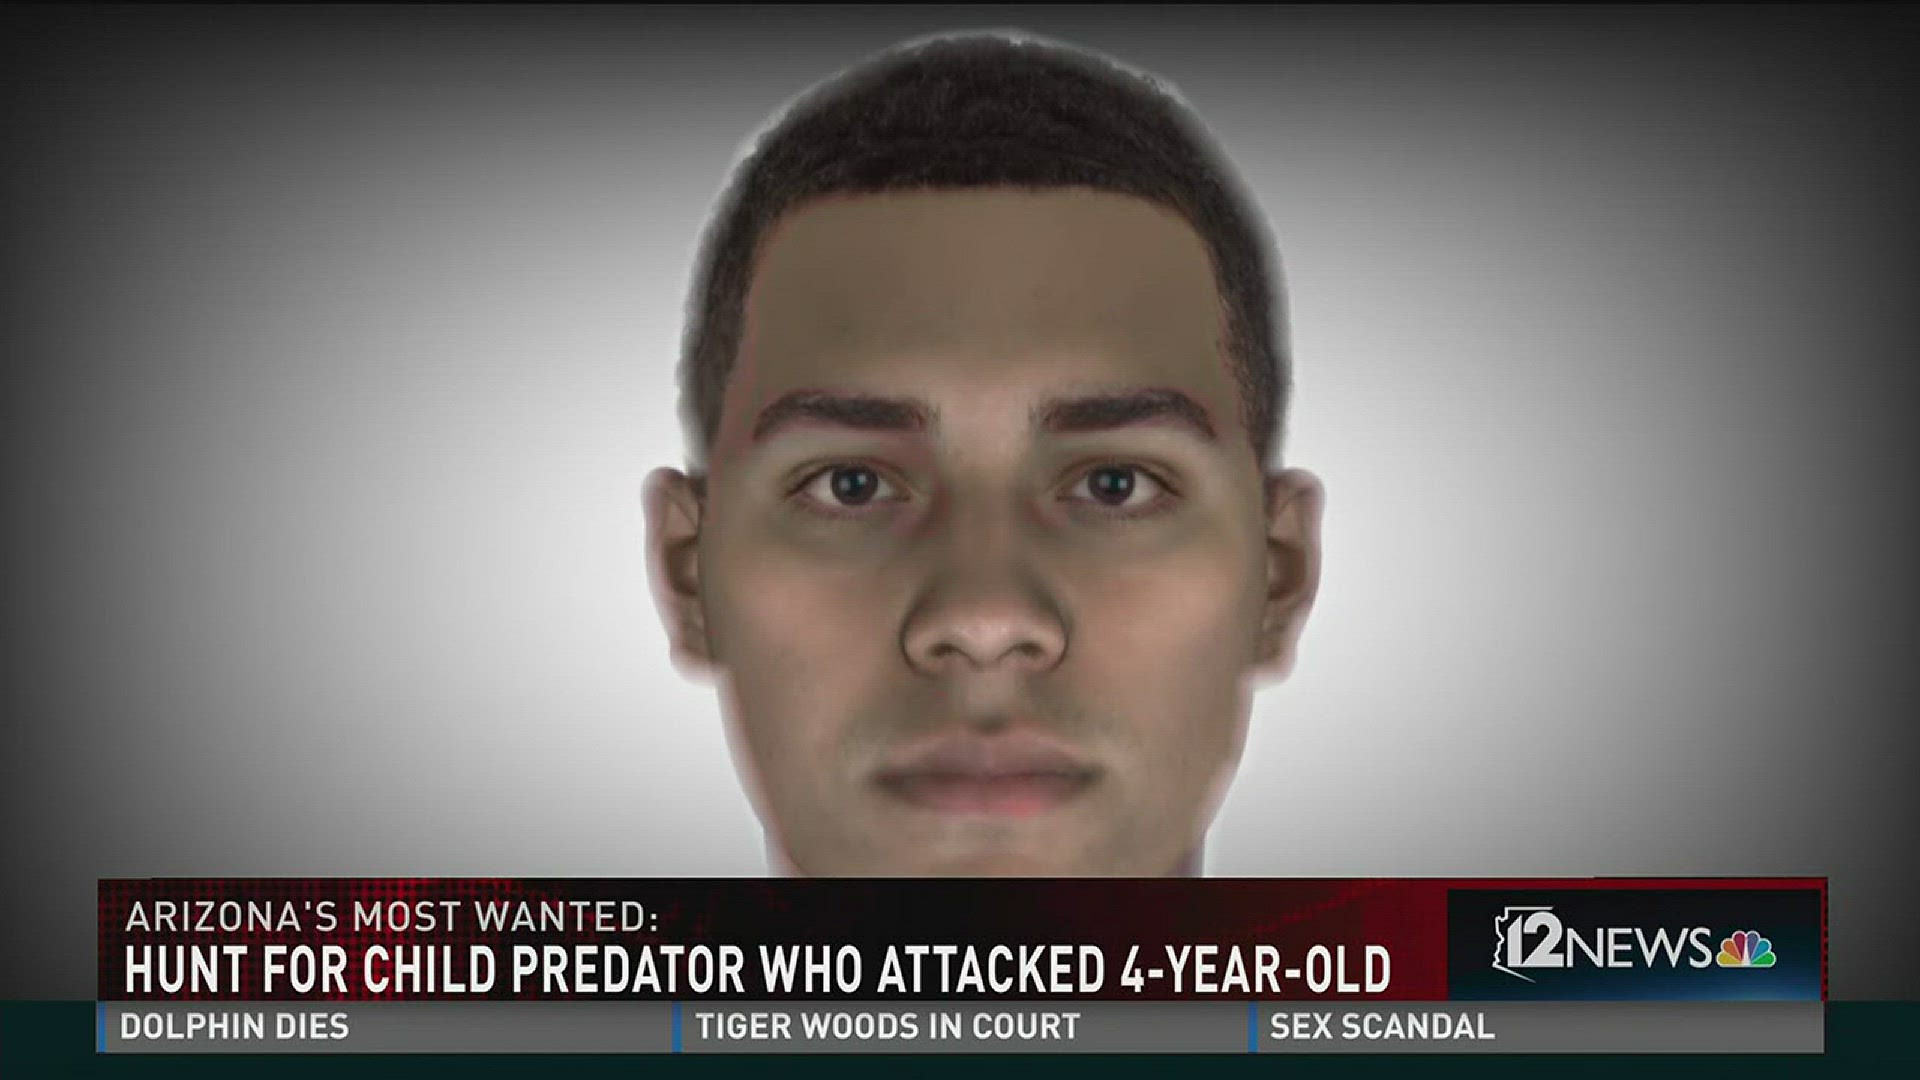 This suspect sexually assaulted a 4-year-old girl earlier this year in Mesa.